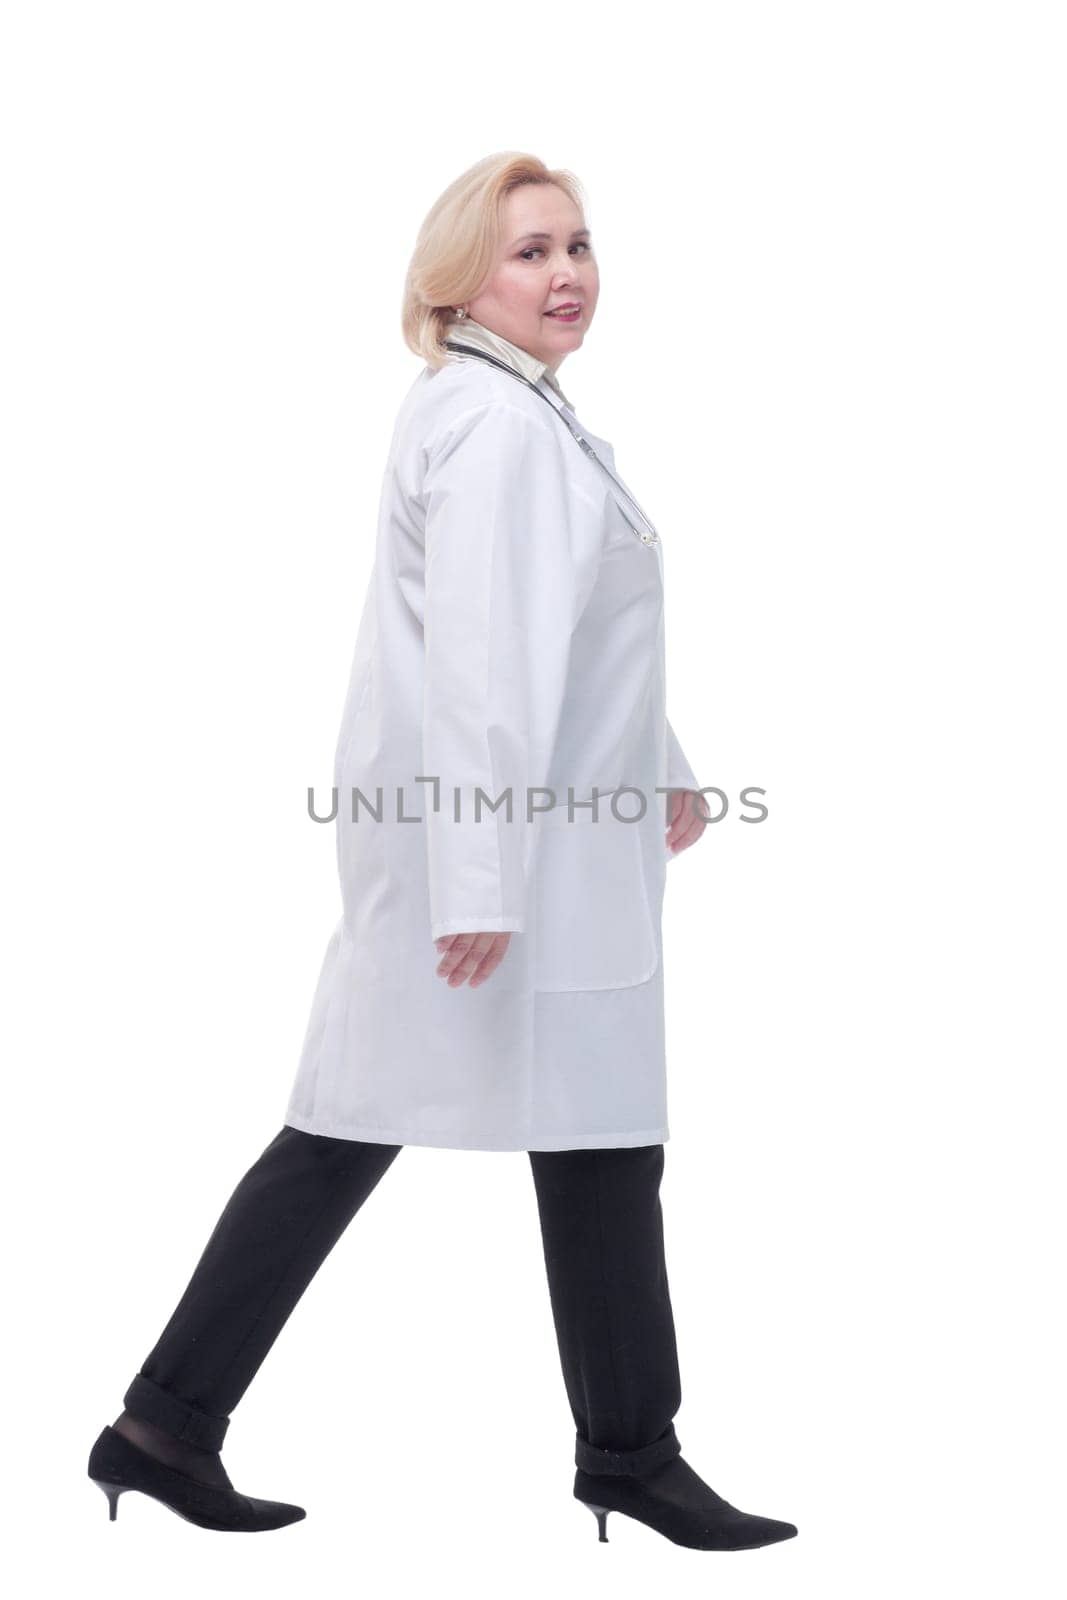 Female doctor walking towards the camera smiling by asdf